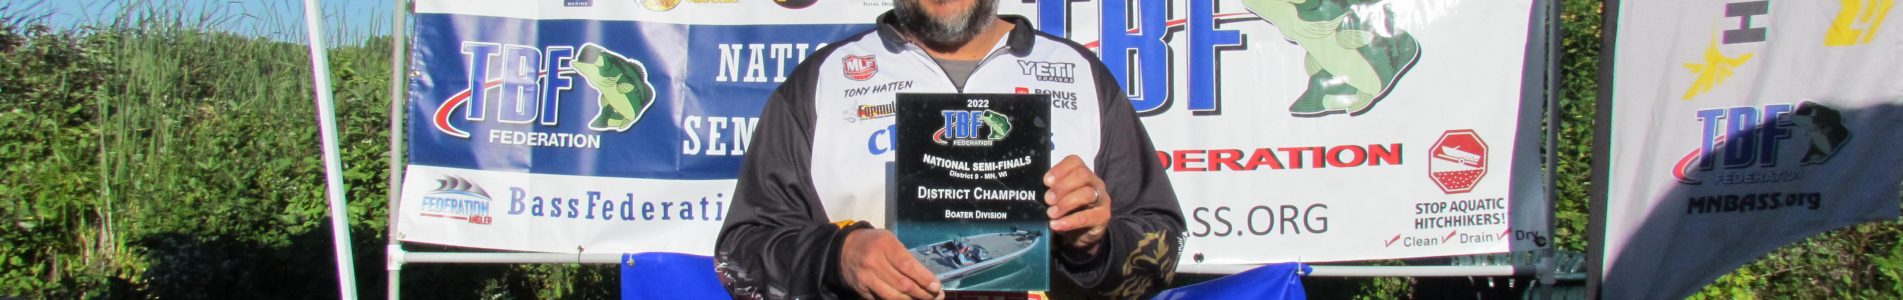 D9 Tony Hatten boater division champion